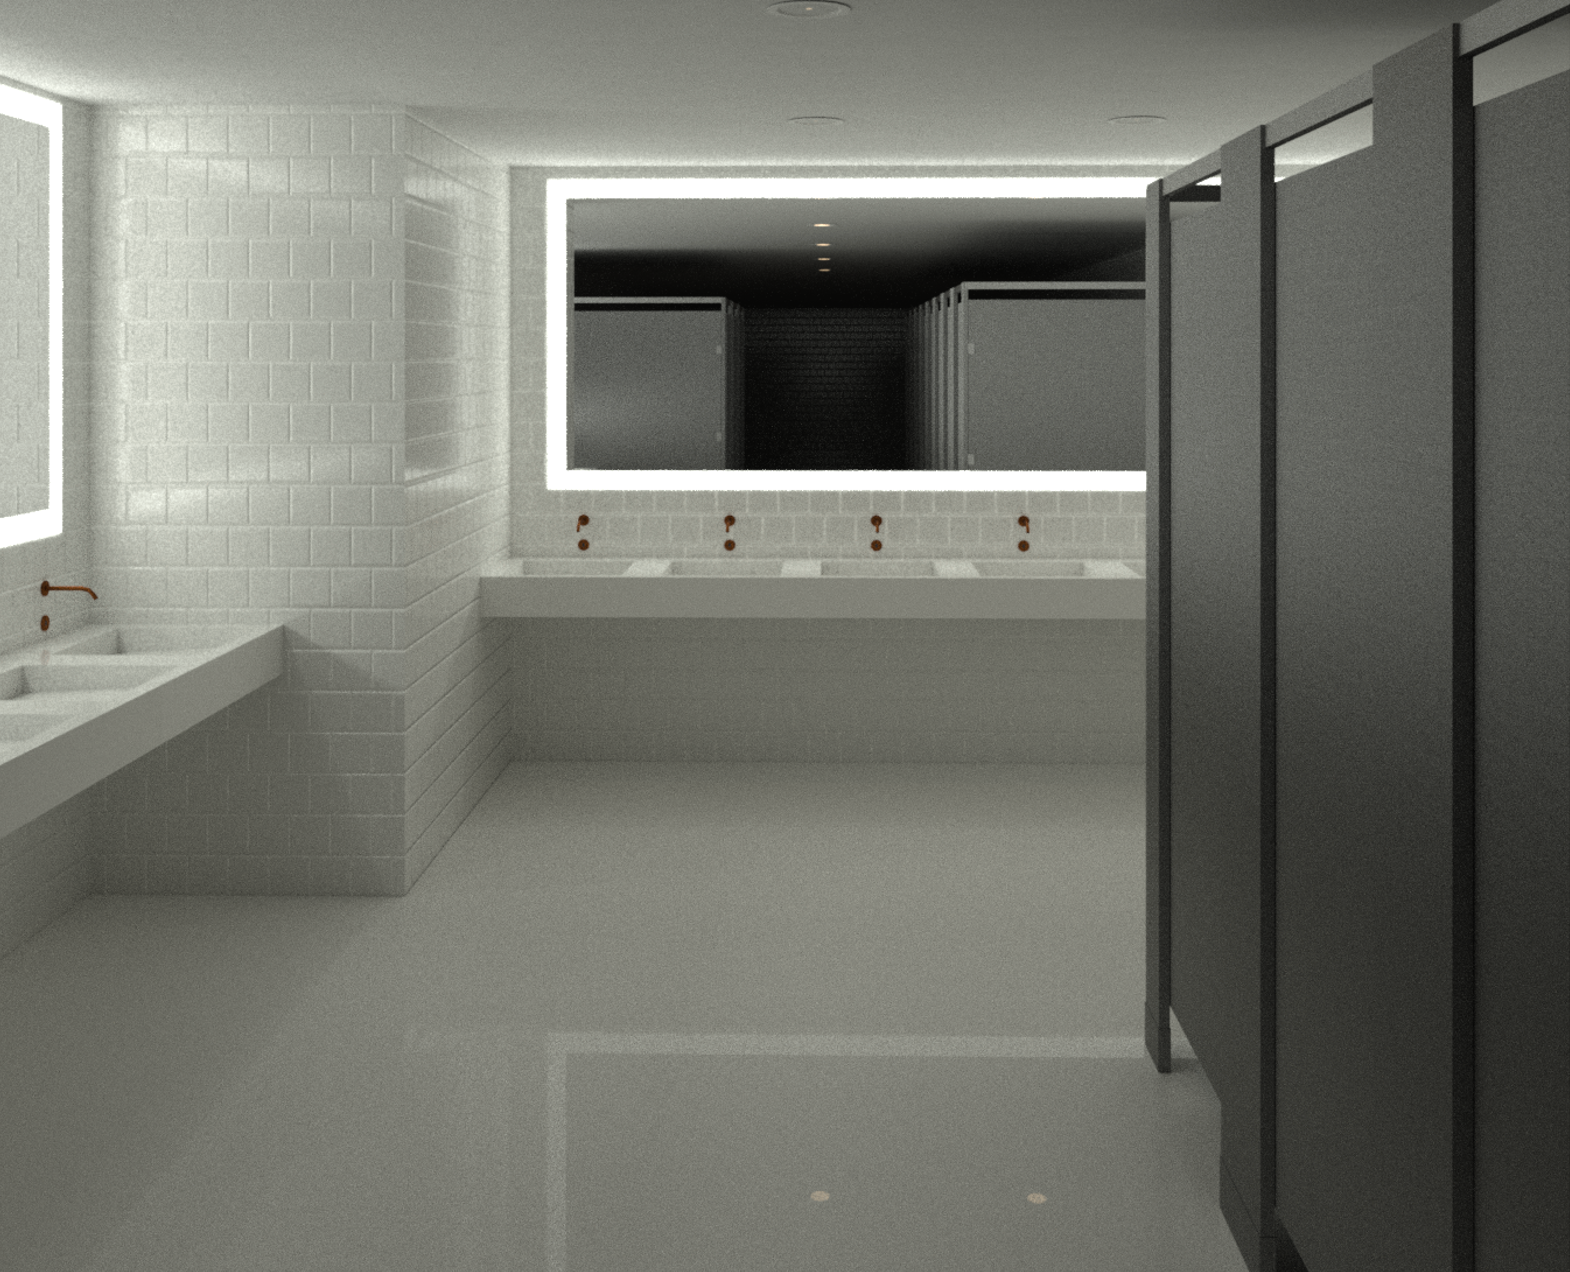 Revit render showing mock-up bathroom with furniture from the collection.